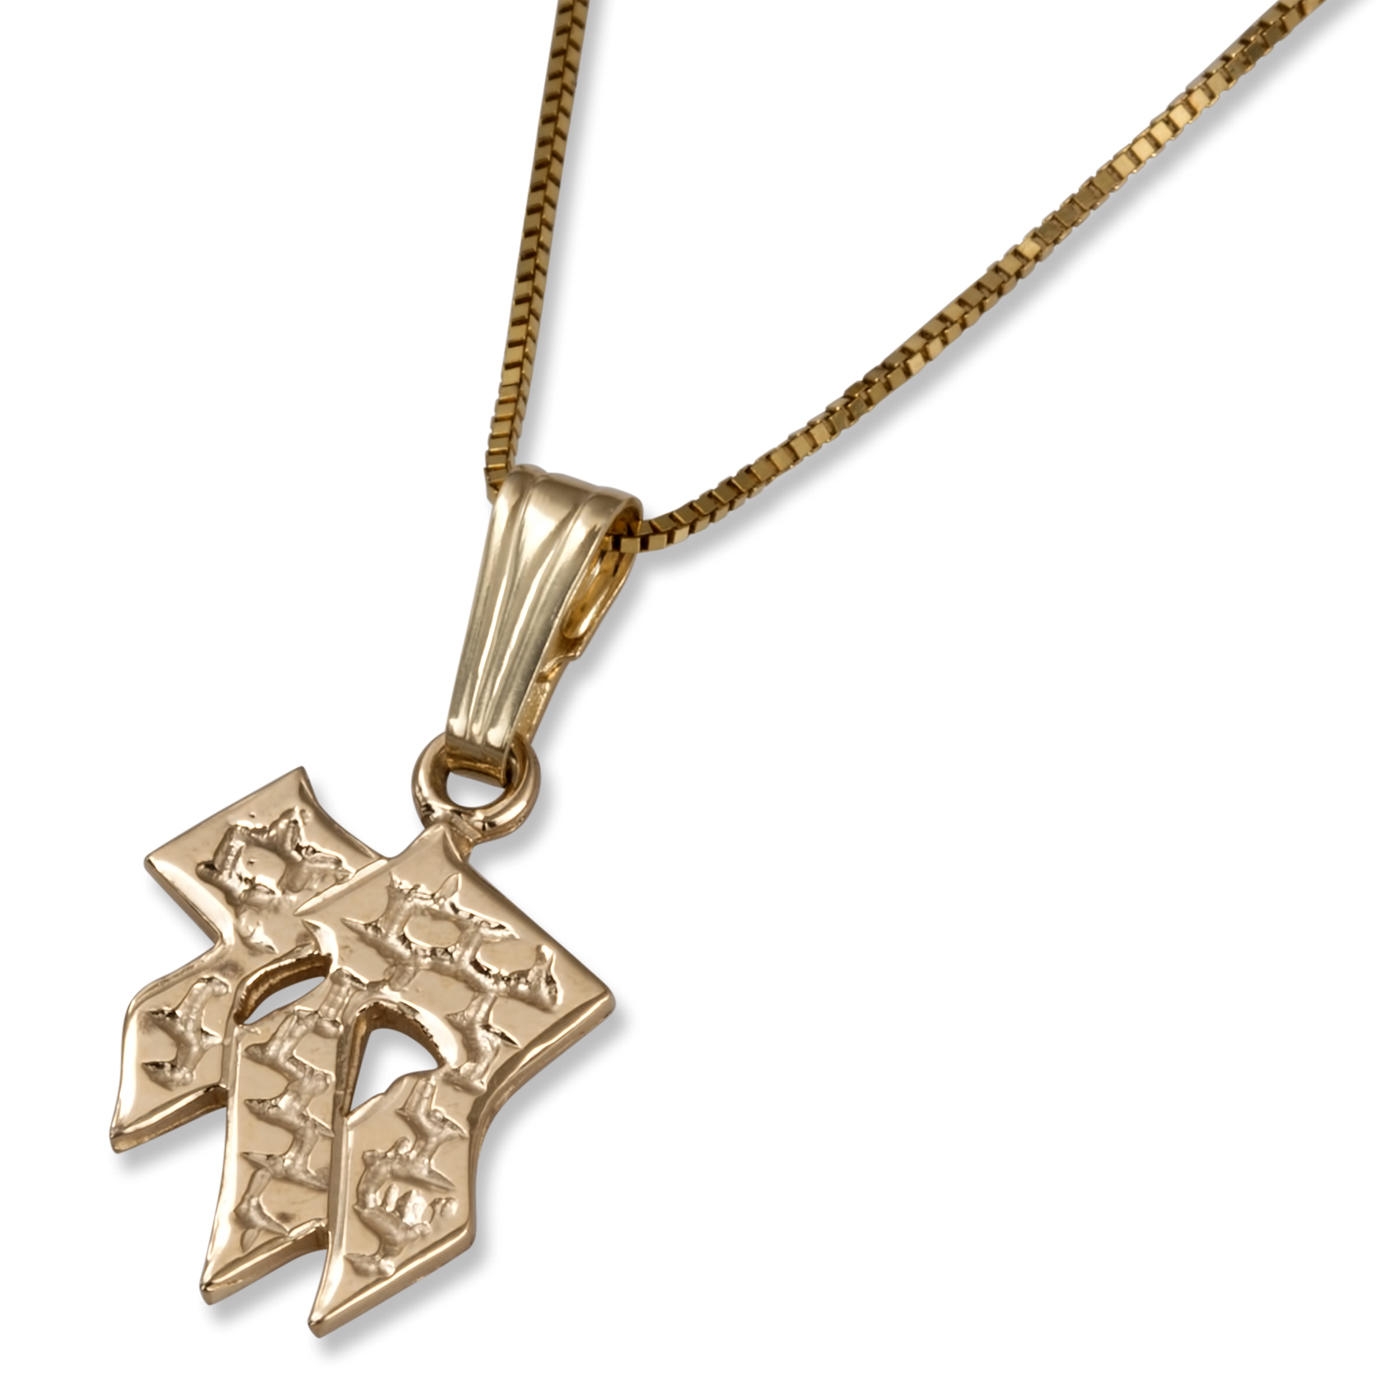 14K Yellow Gold Chai Pendant with Western Wall Brick Engraving - 1